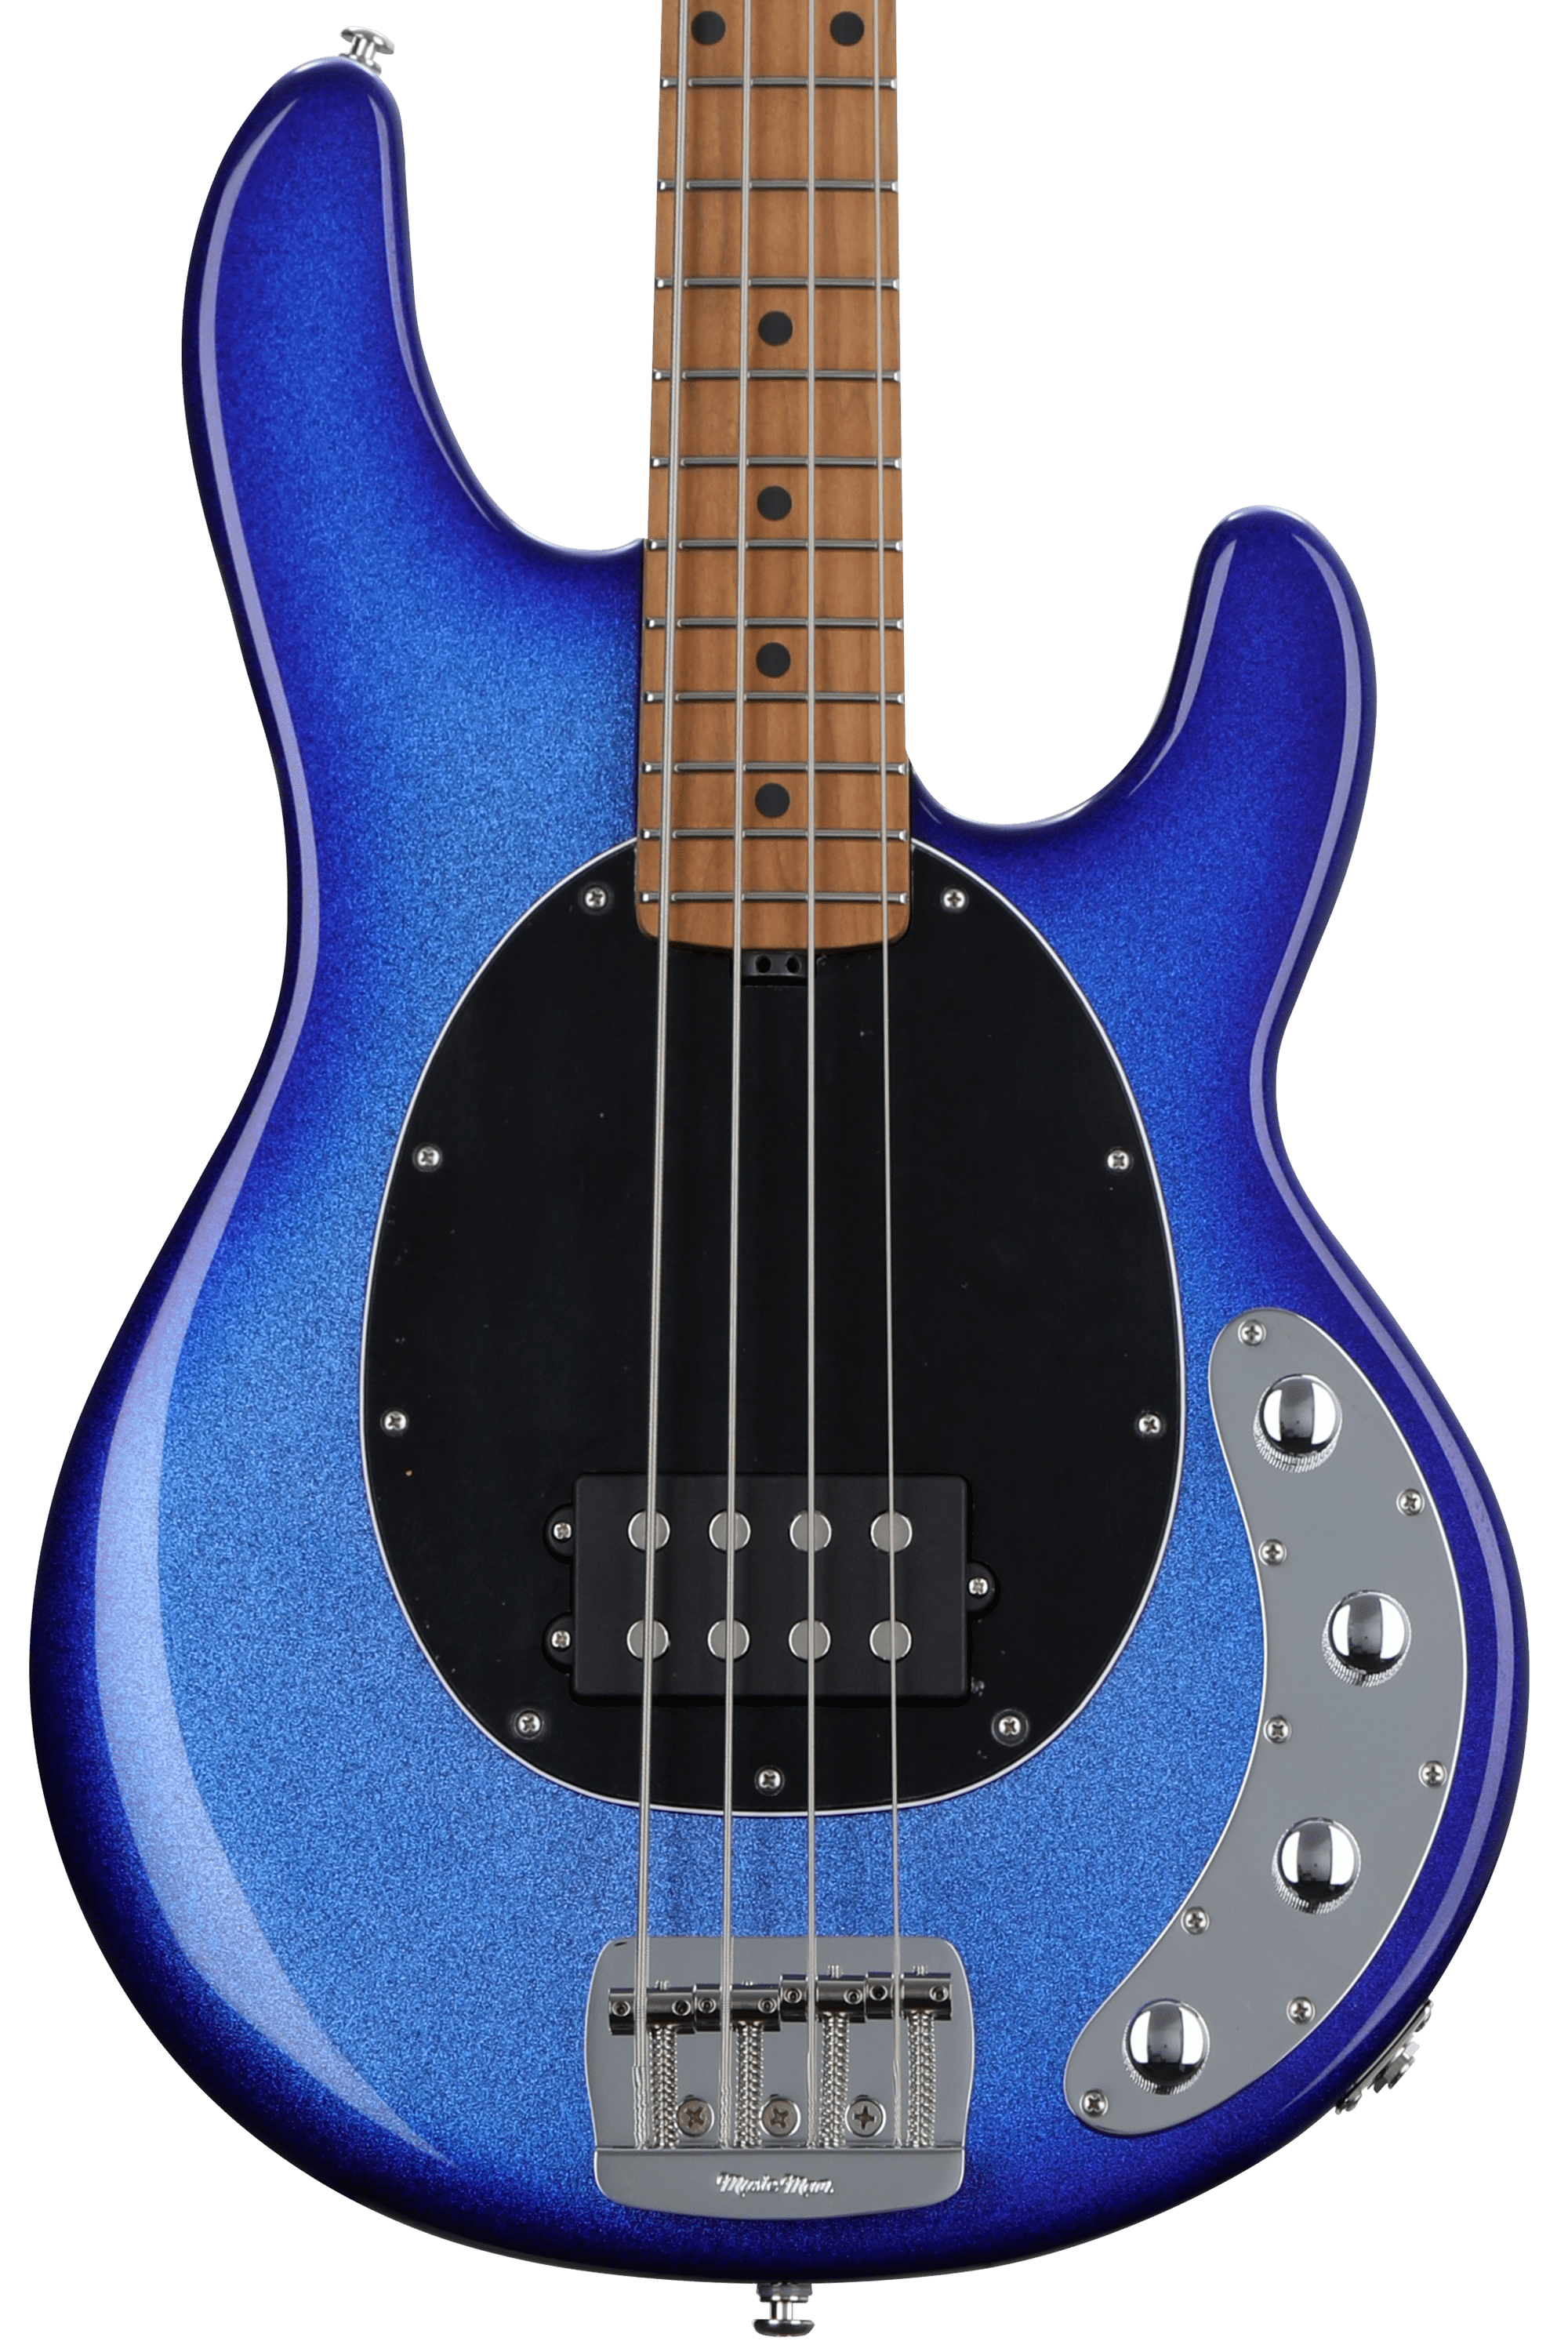 Ernie Ball Music Man StingRay Special Bass Guitar - Pacific Blue Sparkle,  Sweetwater Exclusive